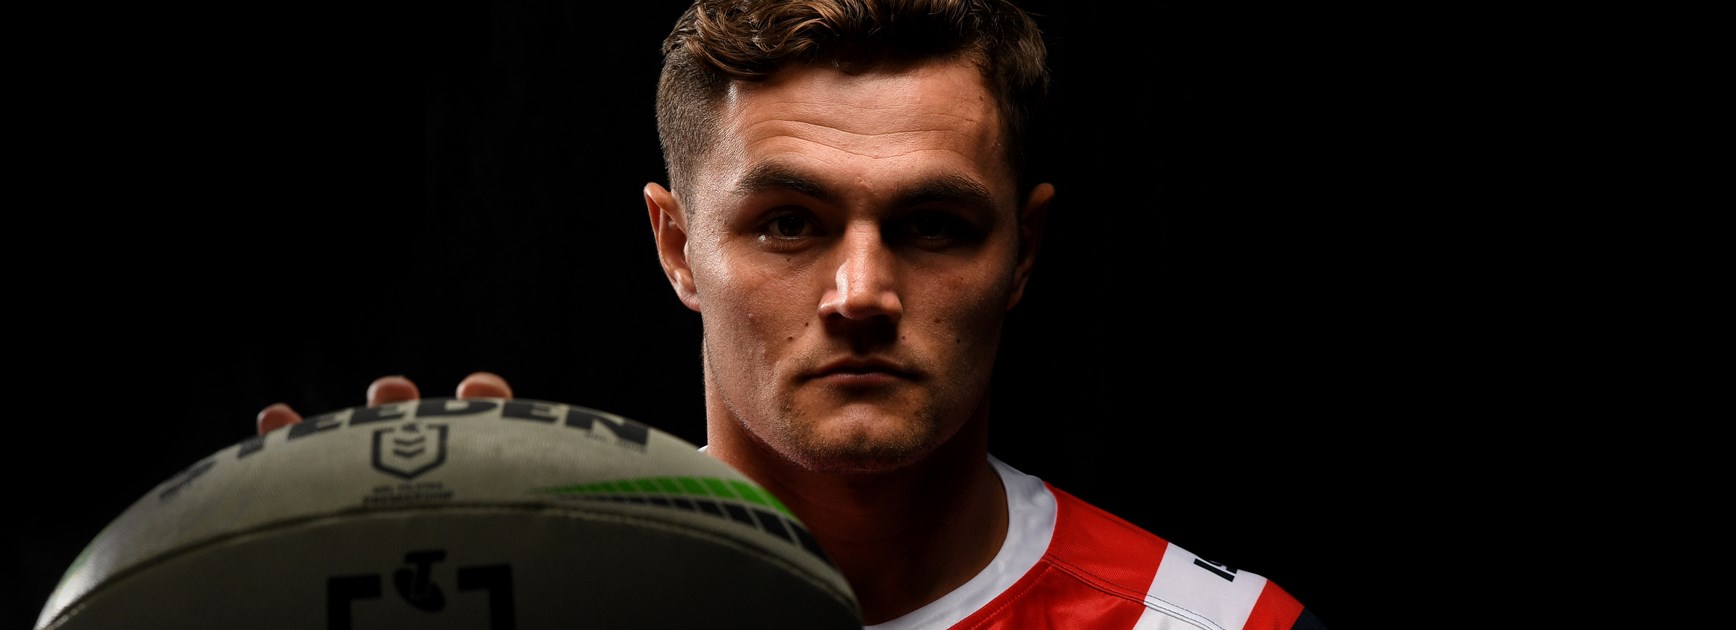 Flanagan to work from Cronk red, white and blueprint